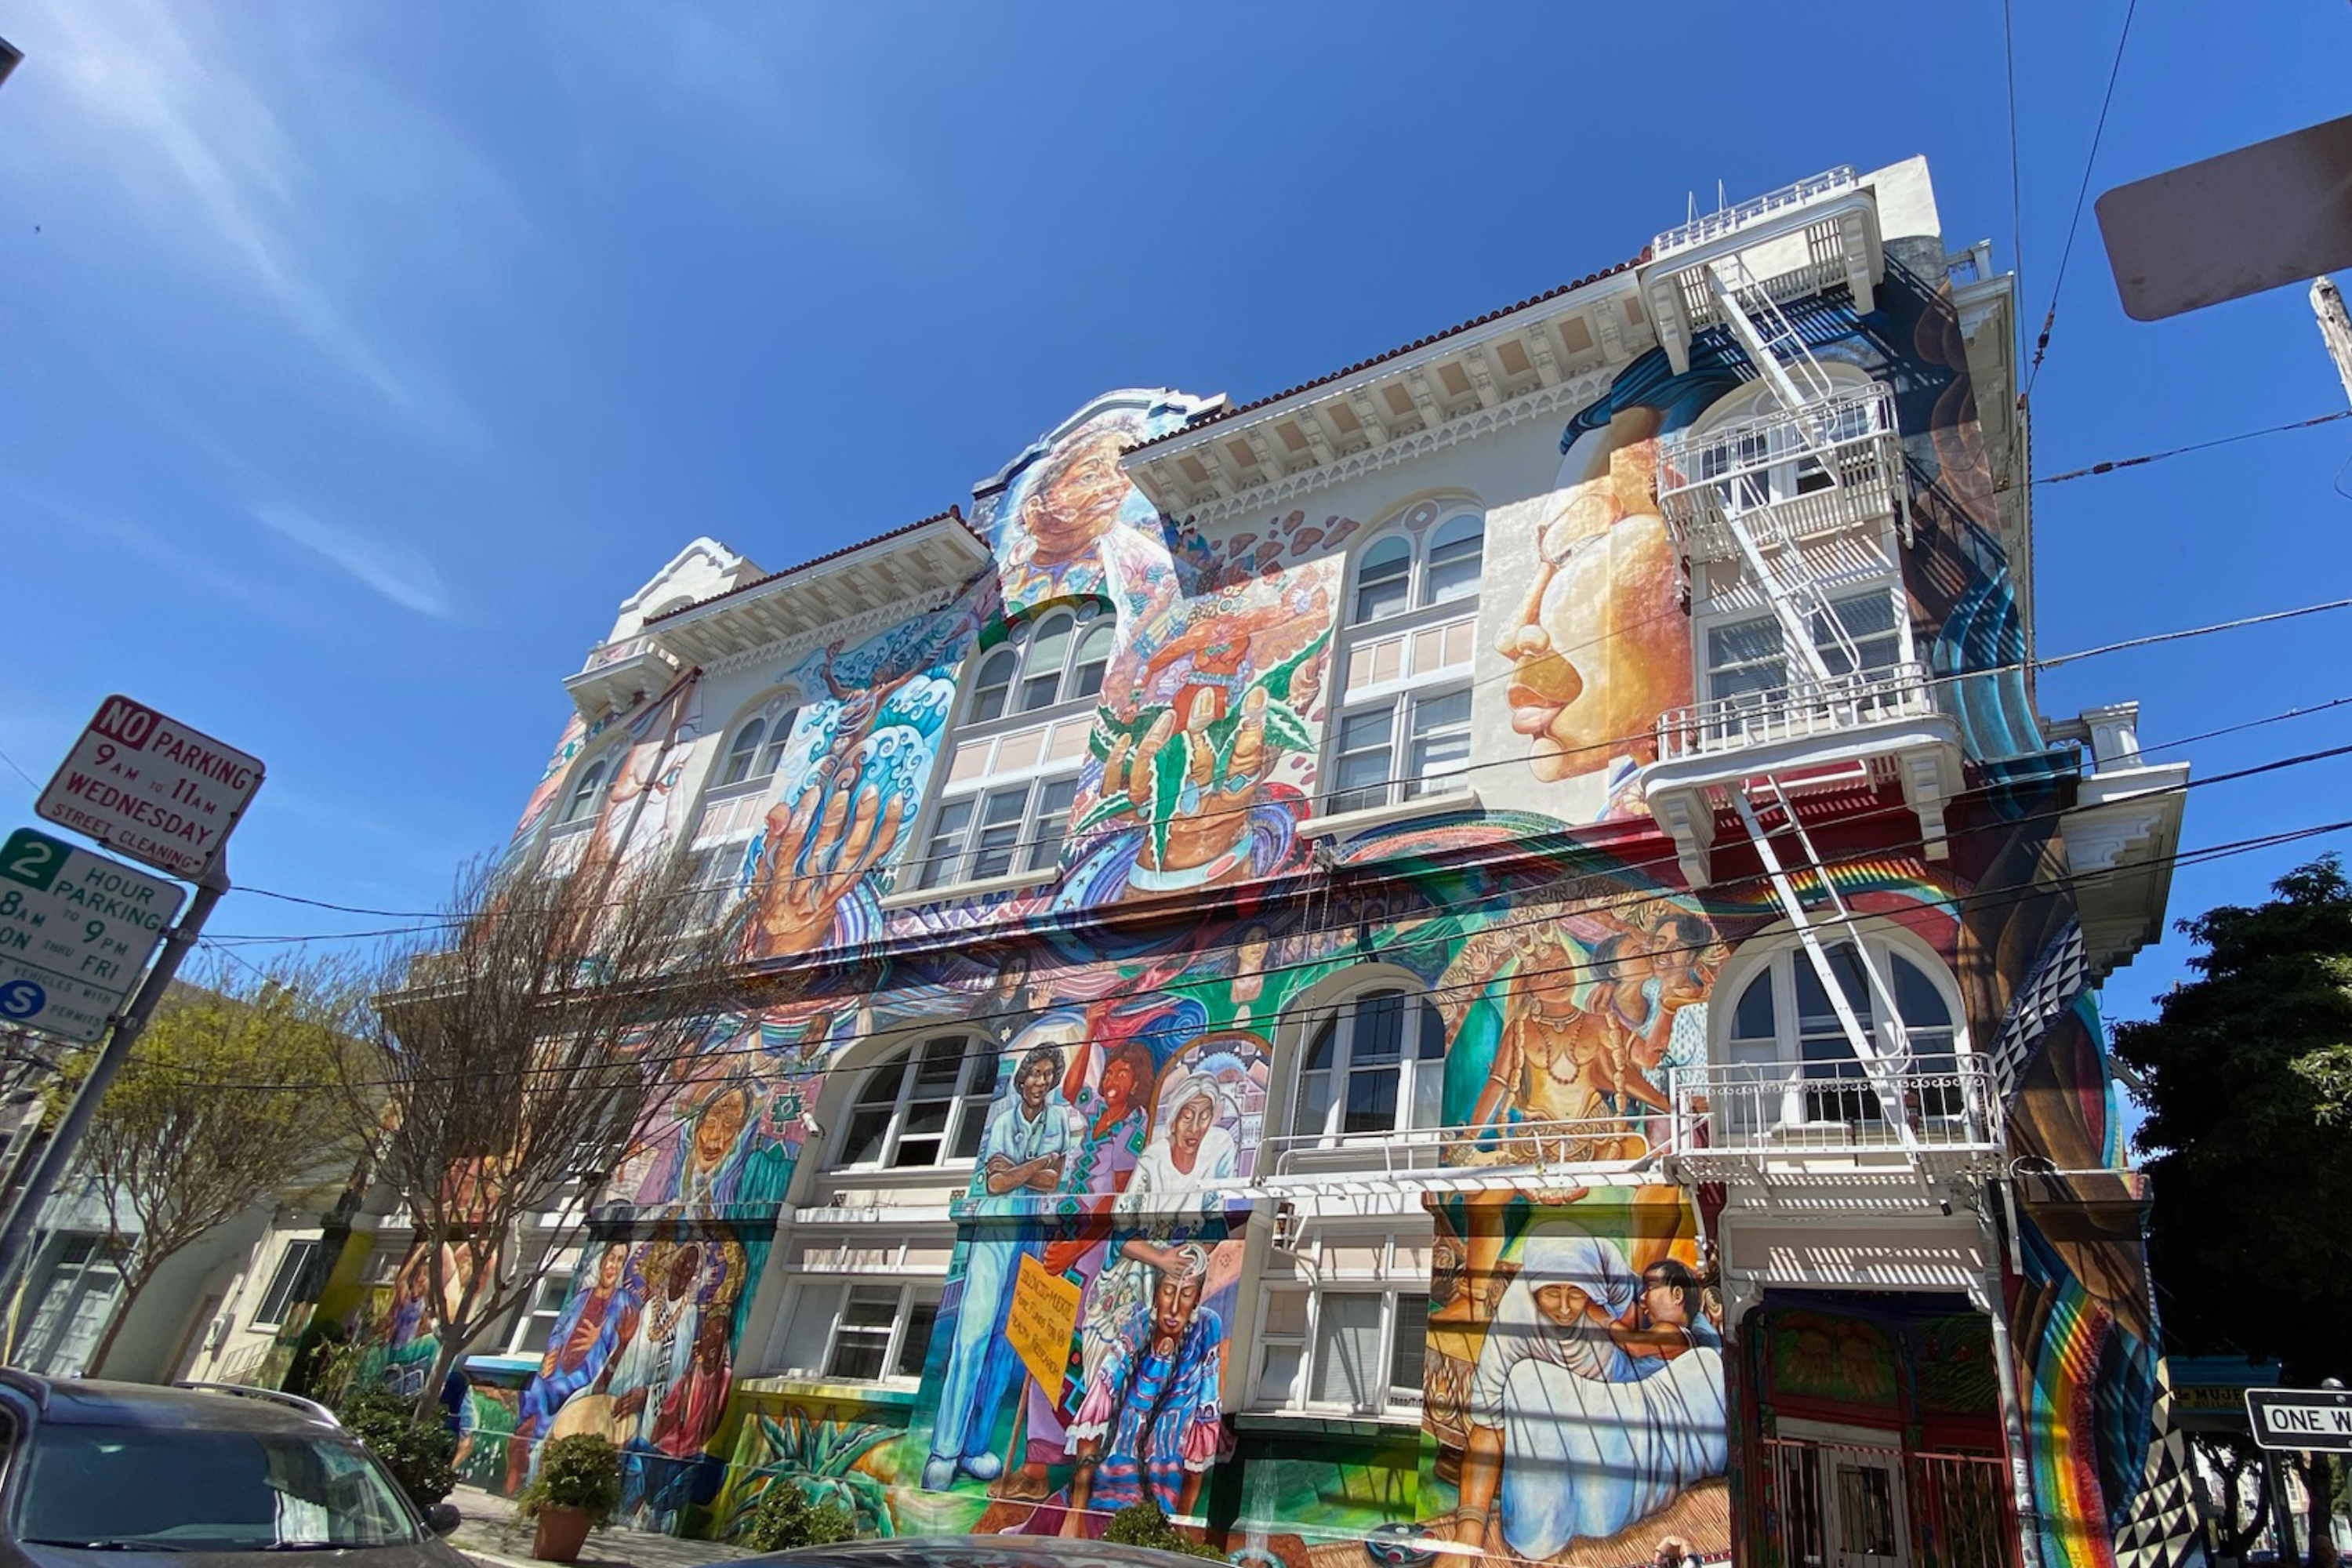 The Women's building mural in San Francisco's Mission neighborhood